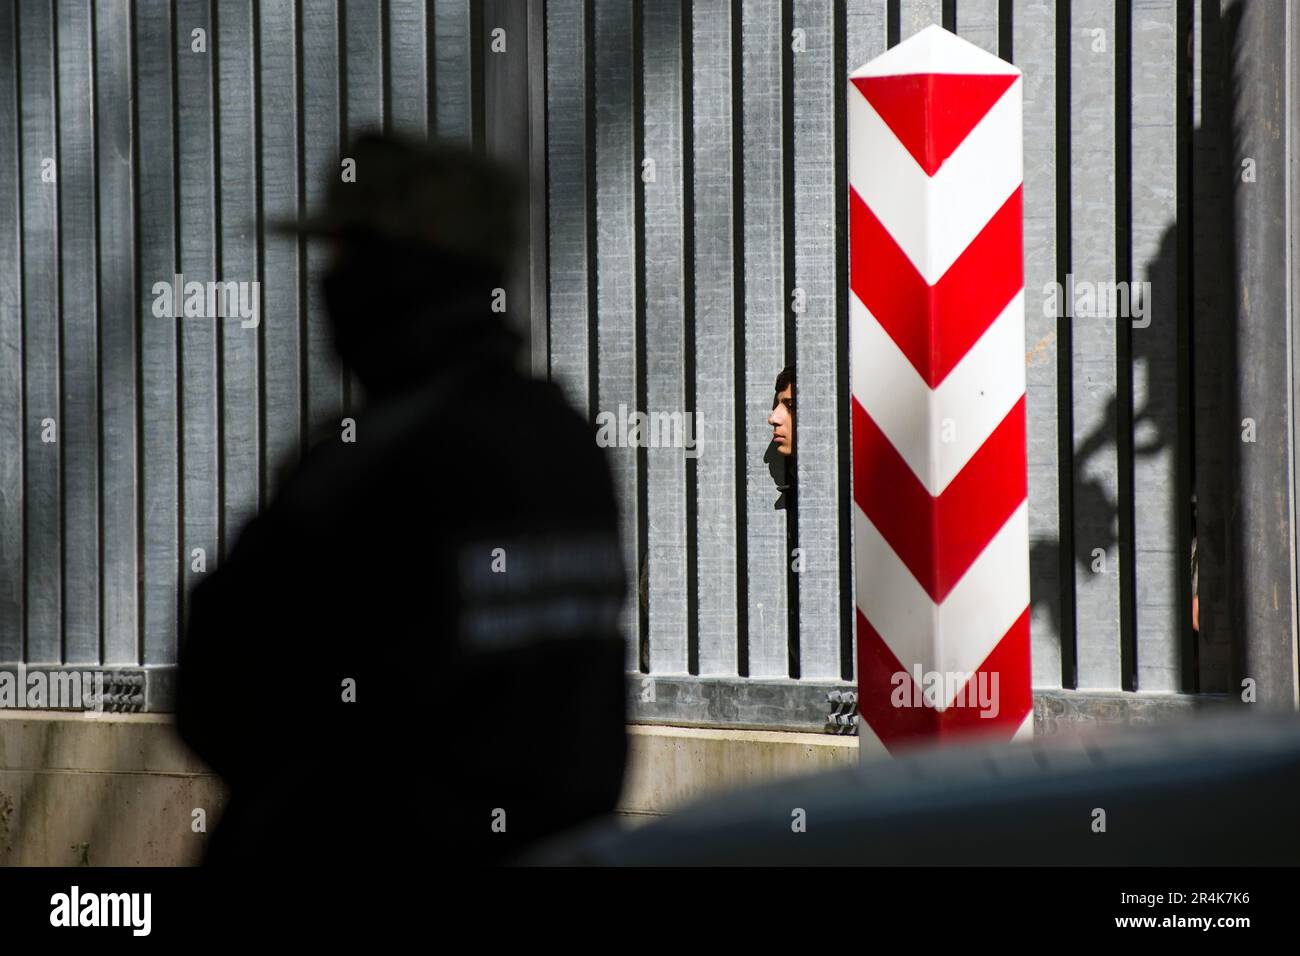 Polish border guards are seen watching the migrants who are stuck at the Polish border wall in Bialowieza. A group of 30 migrants and refugees from Iraq and Syria seeking asylum, including more than 10 children, has been stuck at Poland's border wall with Belarus for three days. Belarusian border guards are not allowing them to turn back to Belarus. Activist Marta Staniszewska form the Grupa Granica (Border Group) organization, who spoke with the migrants, said, that 'Belarusian services told the migrants if they return, they will be beaten, or that they will even kill them”. (Photo by Attila Stock Photo